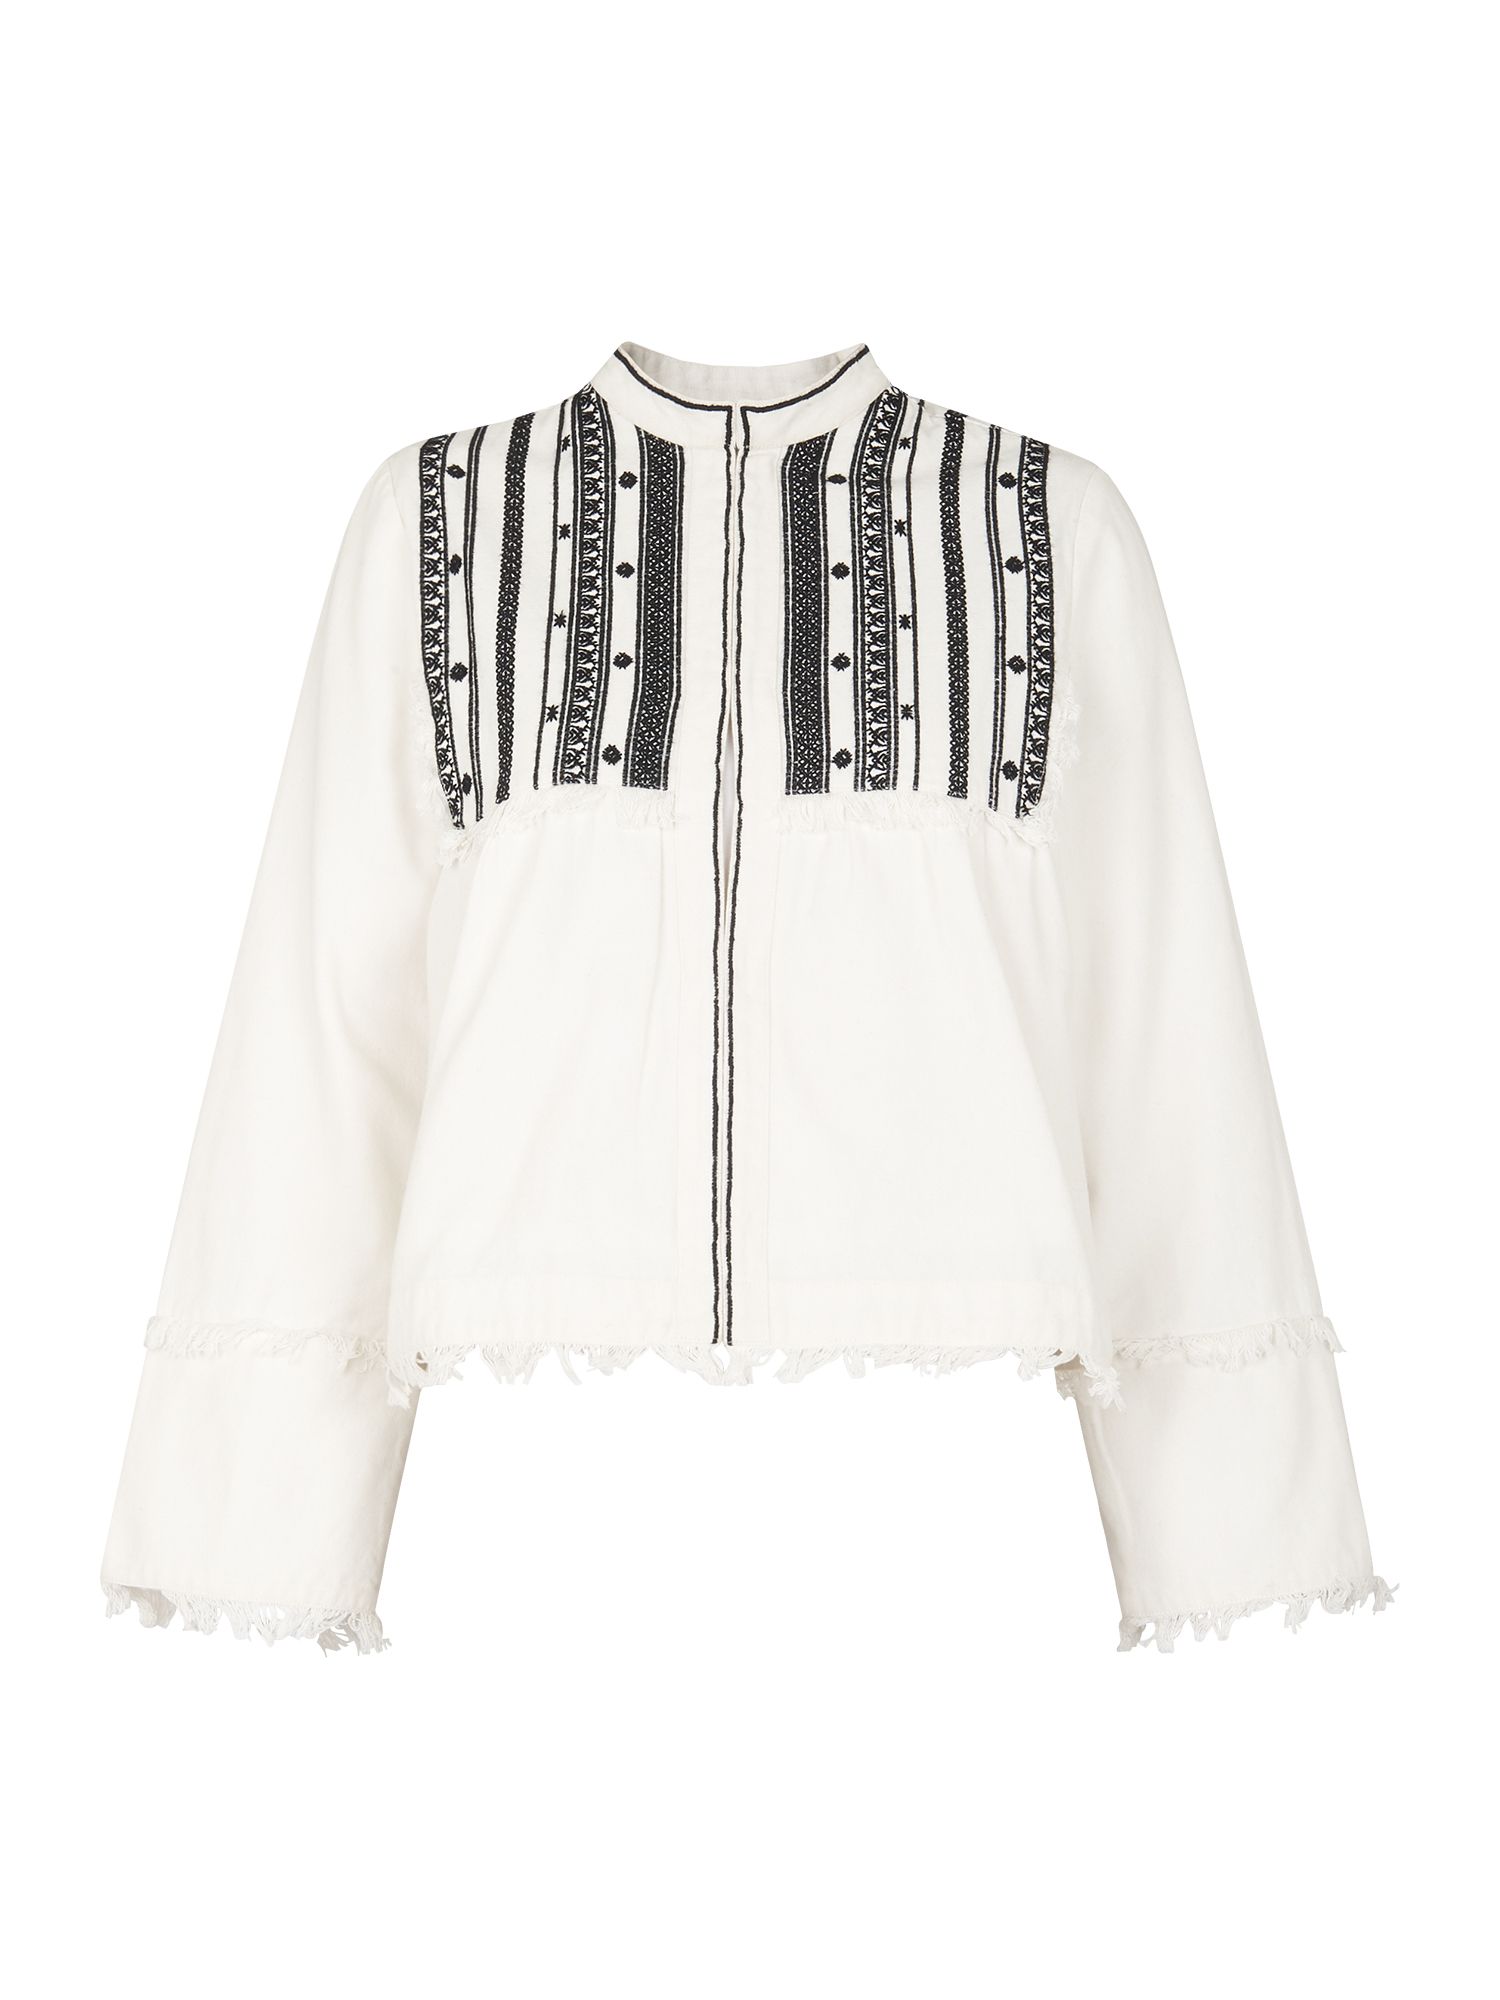 Whistles Embroidered Jacket | The London Mummy